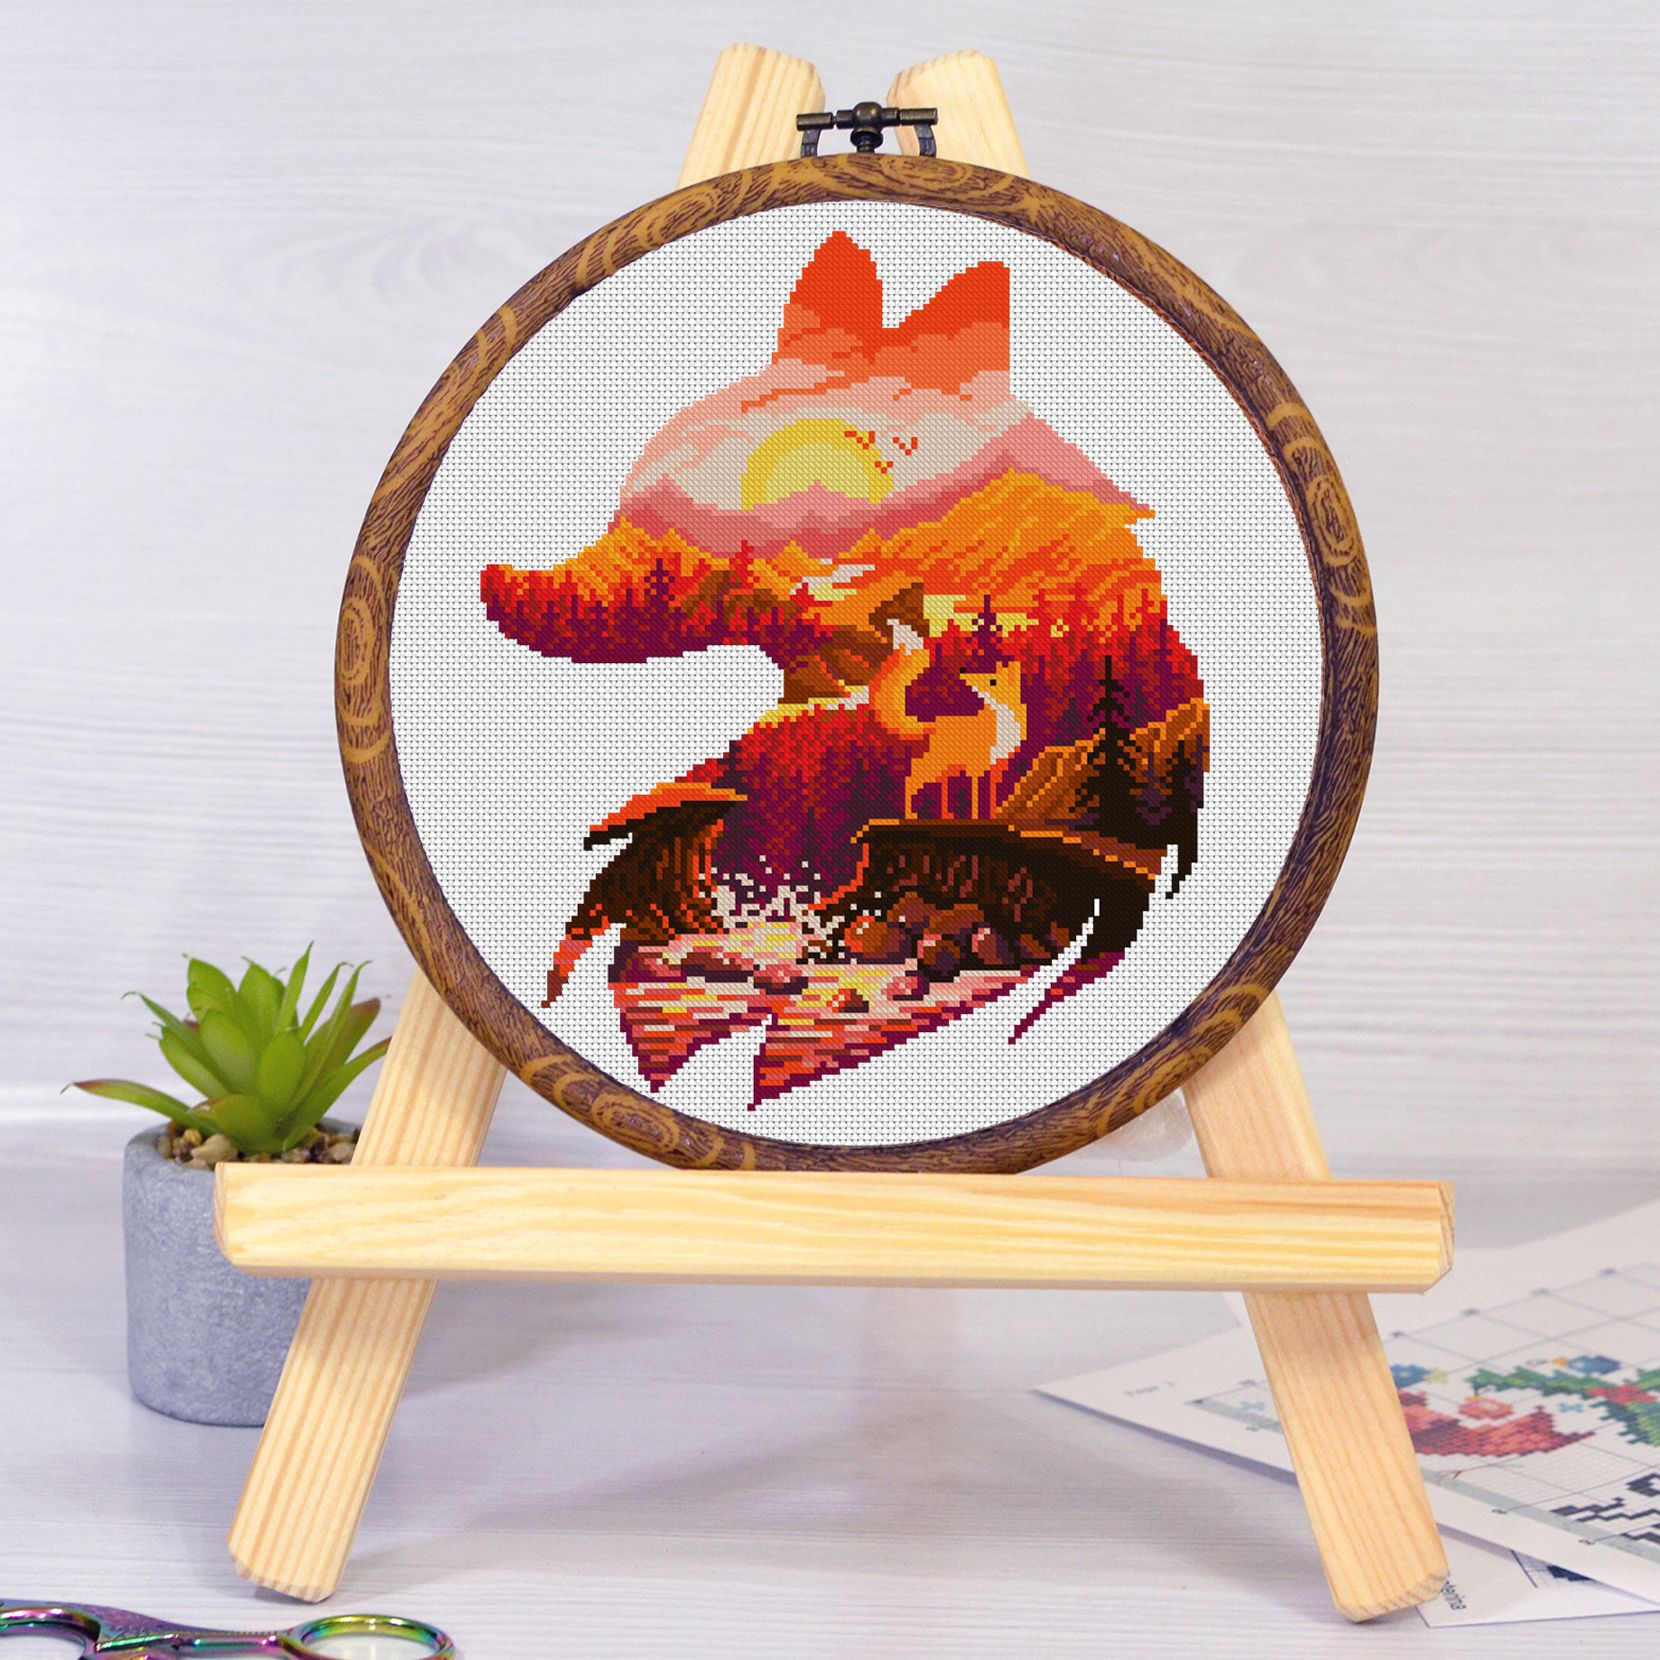 Animals cross stitch collections by Smasterilli. Cute cats embroidery designs, forest animals hoop art. Make gifts for your loved ones and pet lovers gifts. Modern cross stitch patterns and easy for gifts and wall decoration.